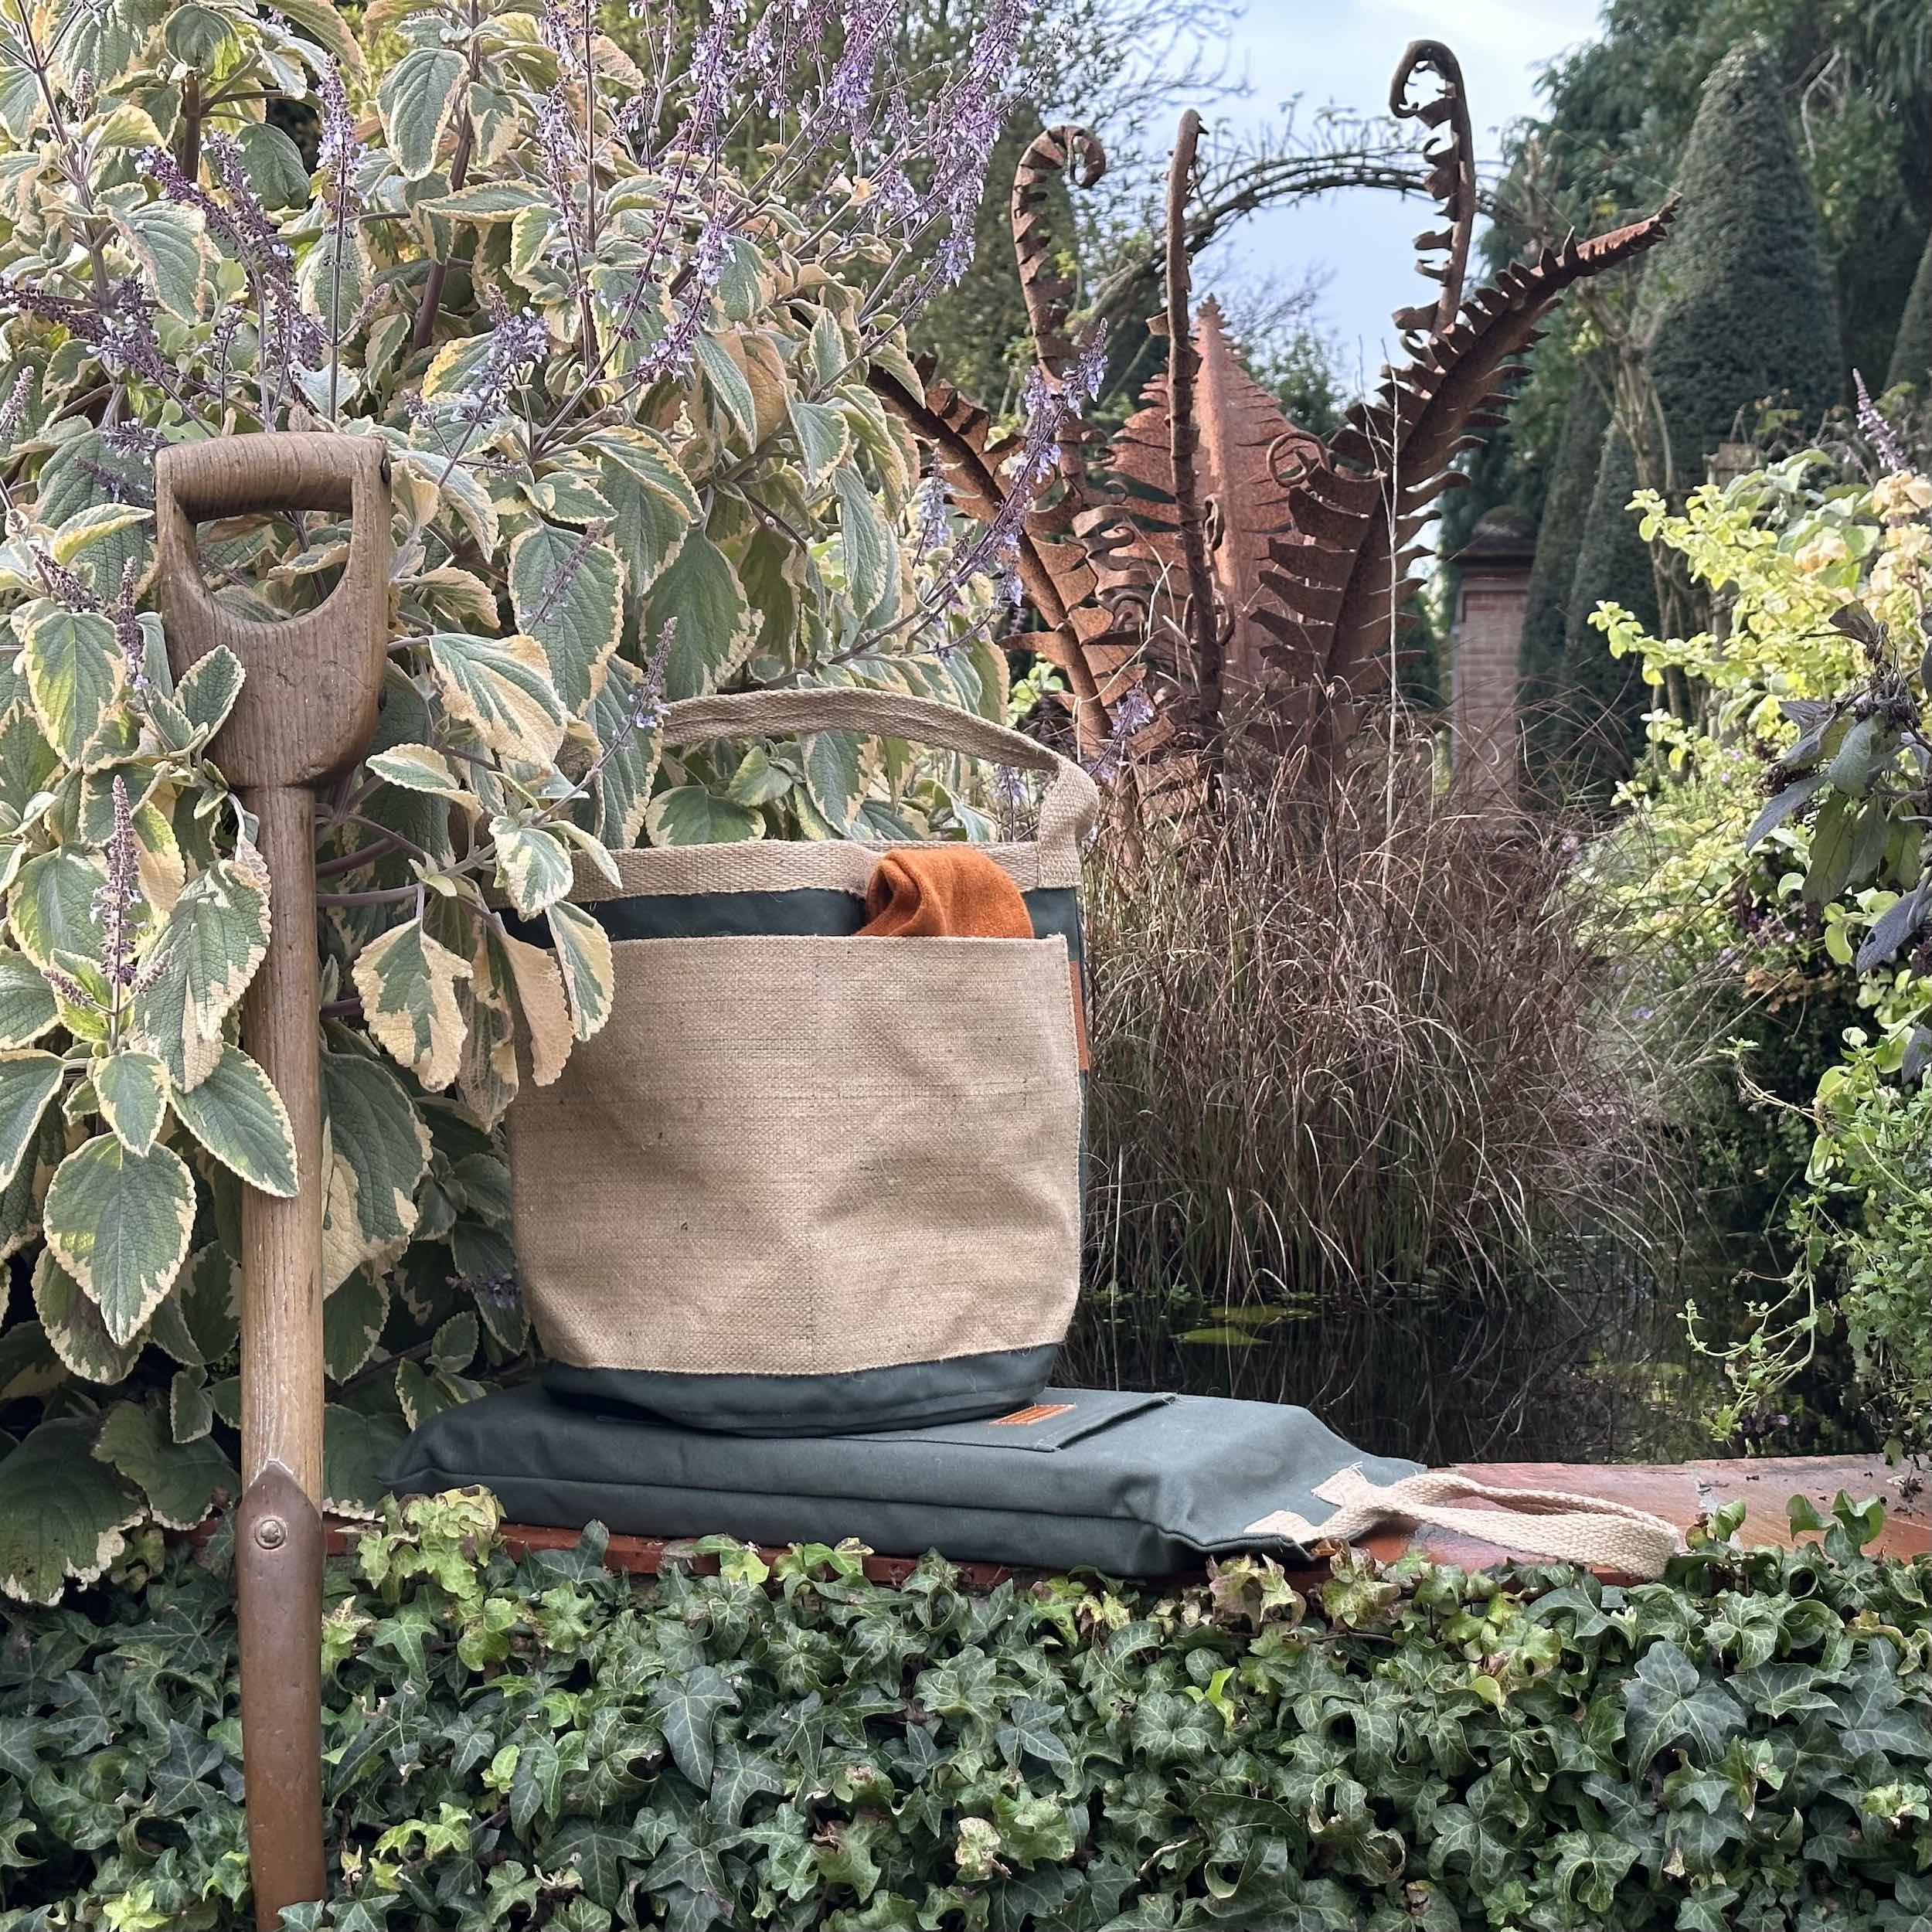 Carrier Company Gardener's Pail, Kneeler and Gathering Glove